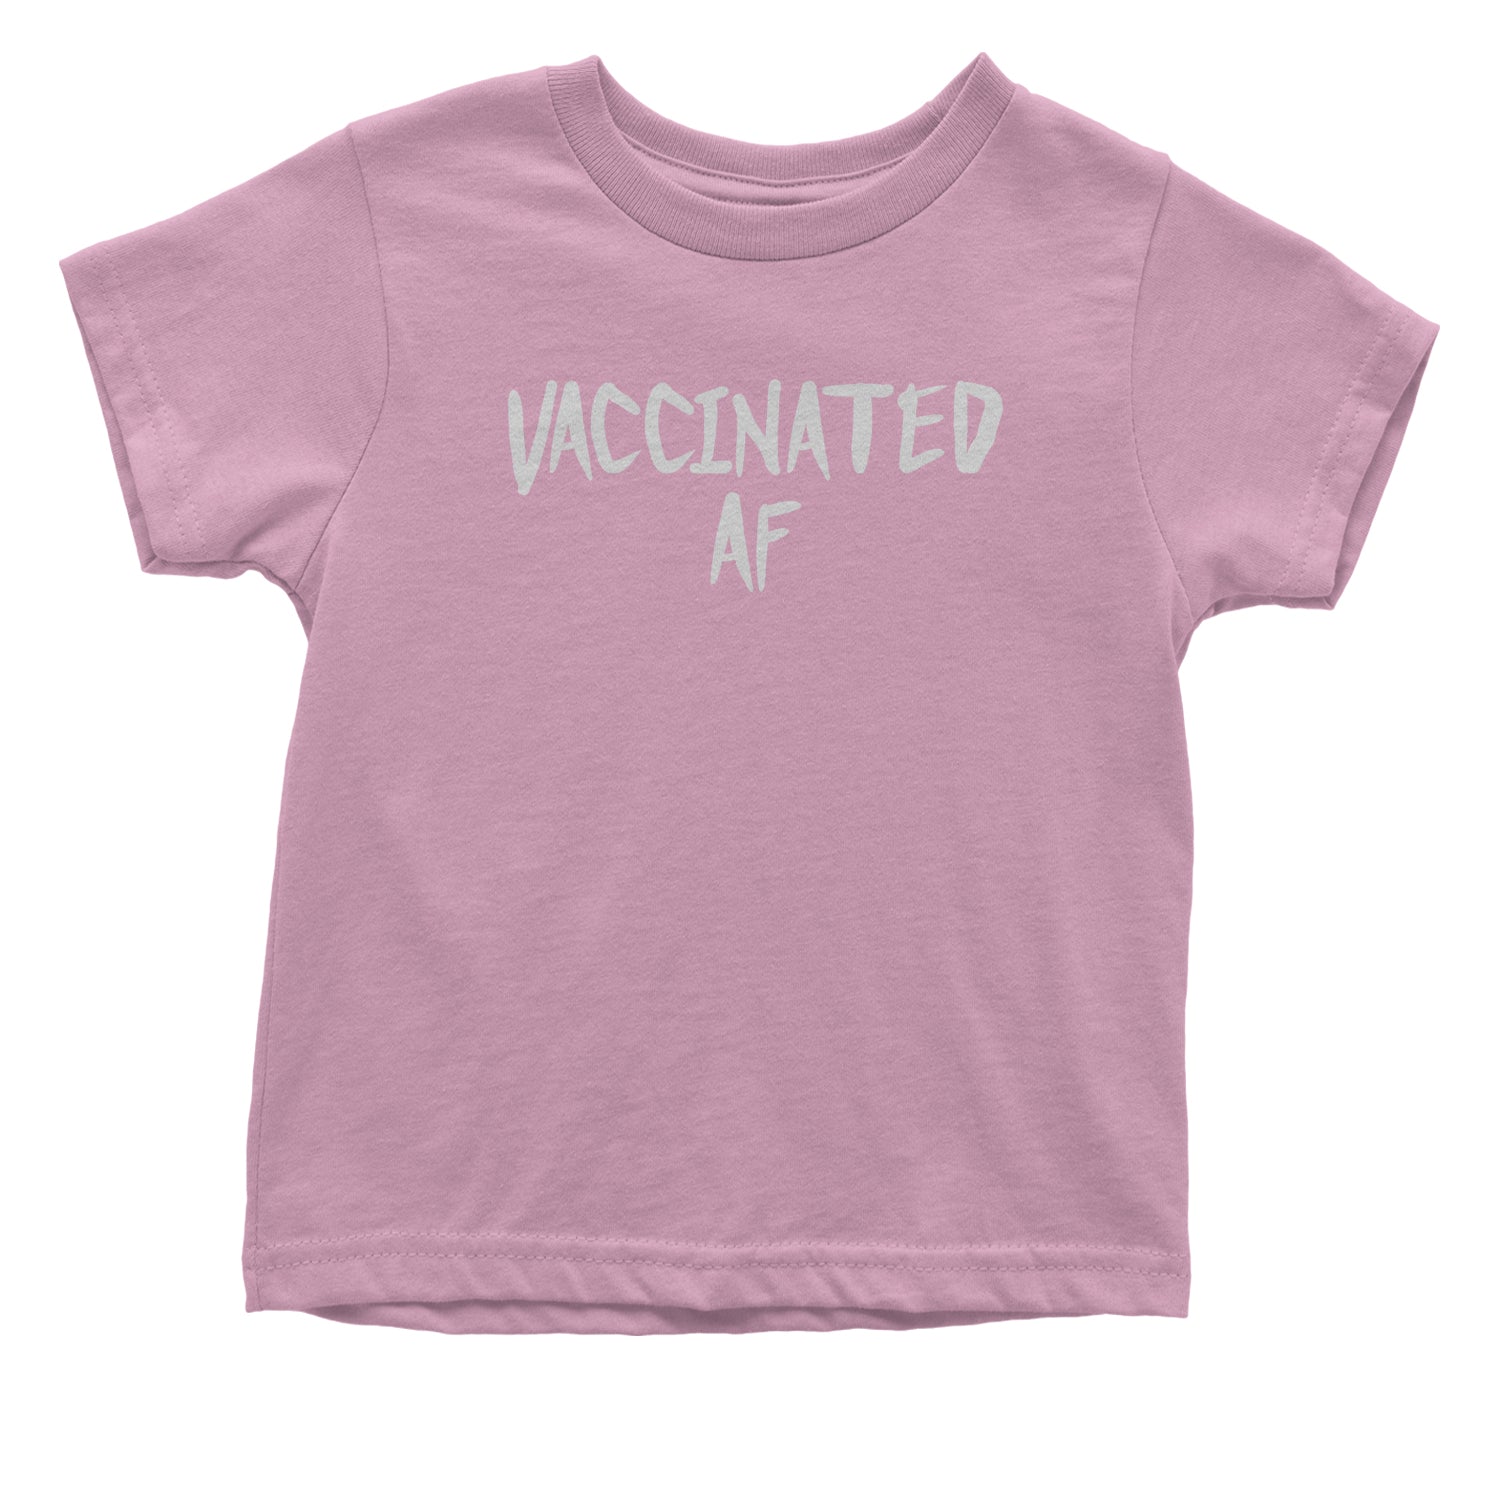 Vaccinated AF Pro Vaccine Funny Vaccination Health Toddler T-Shirt moderna, pfizer, vaccine, vax, vaxx by Expression Tees